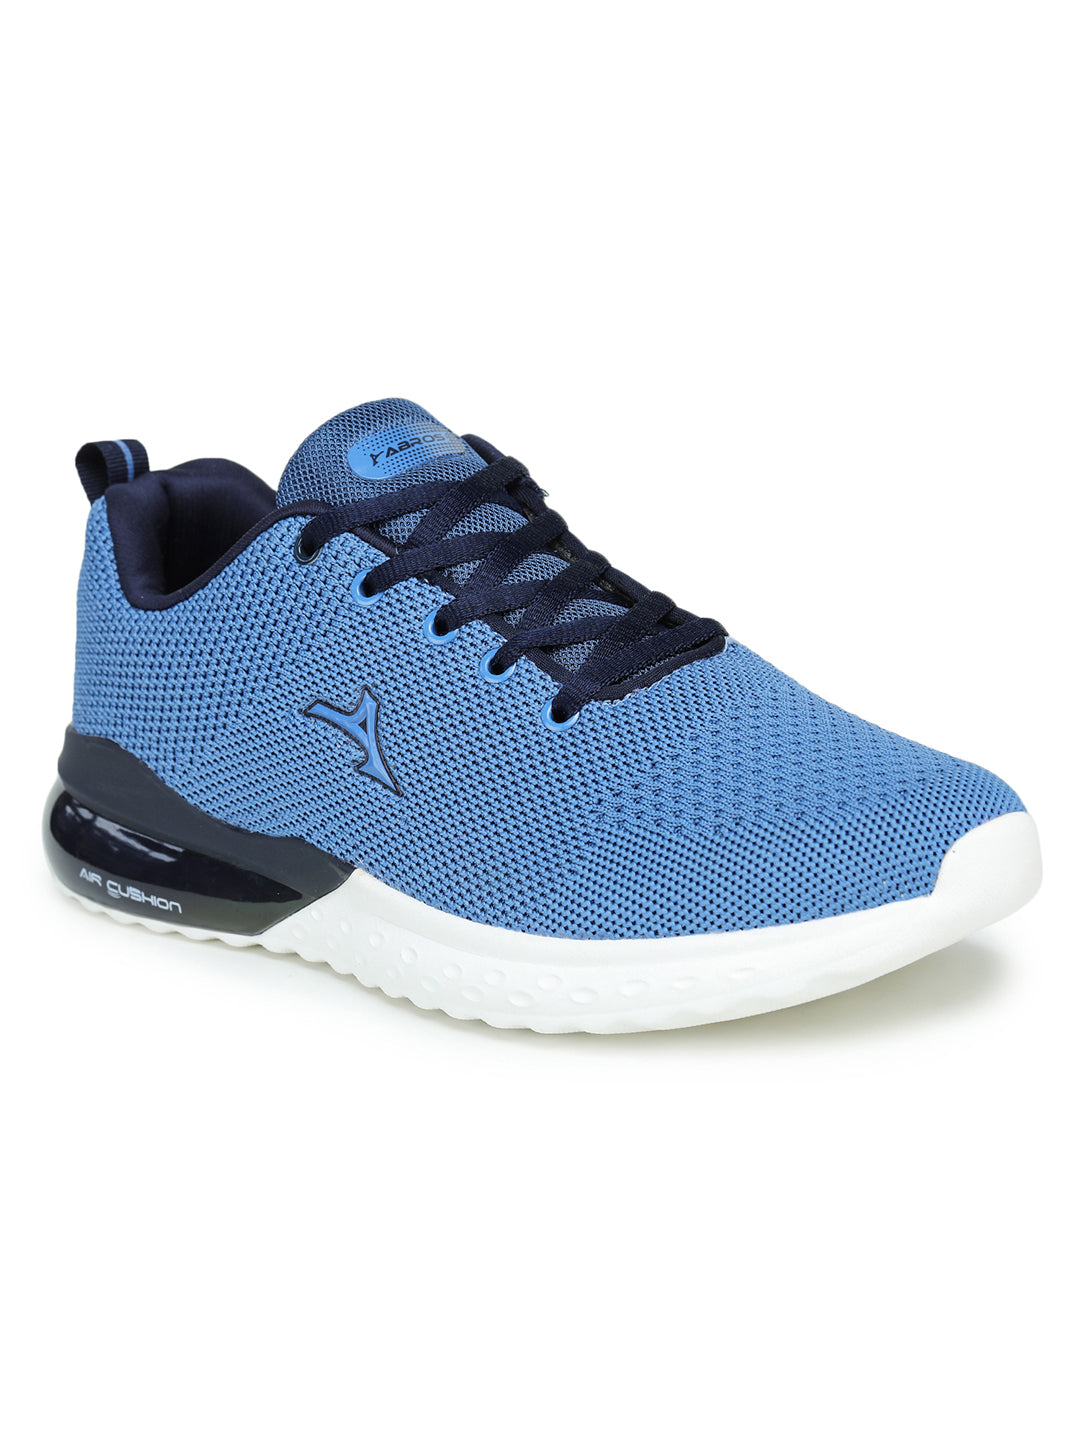 Furo by Red Chief By Red Chief Running Sports Shoes Running Shoes For Men -  Buy Furo by Red Chief By Red Chief Running Sports Shoes Running Shoes For  Men Online at